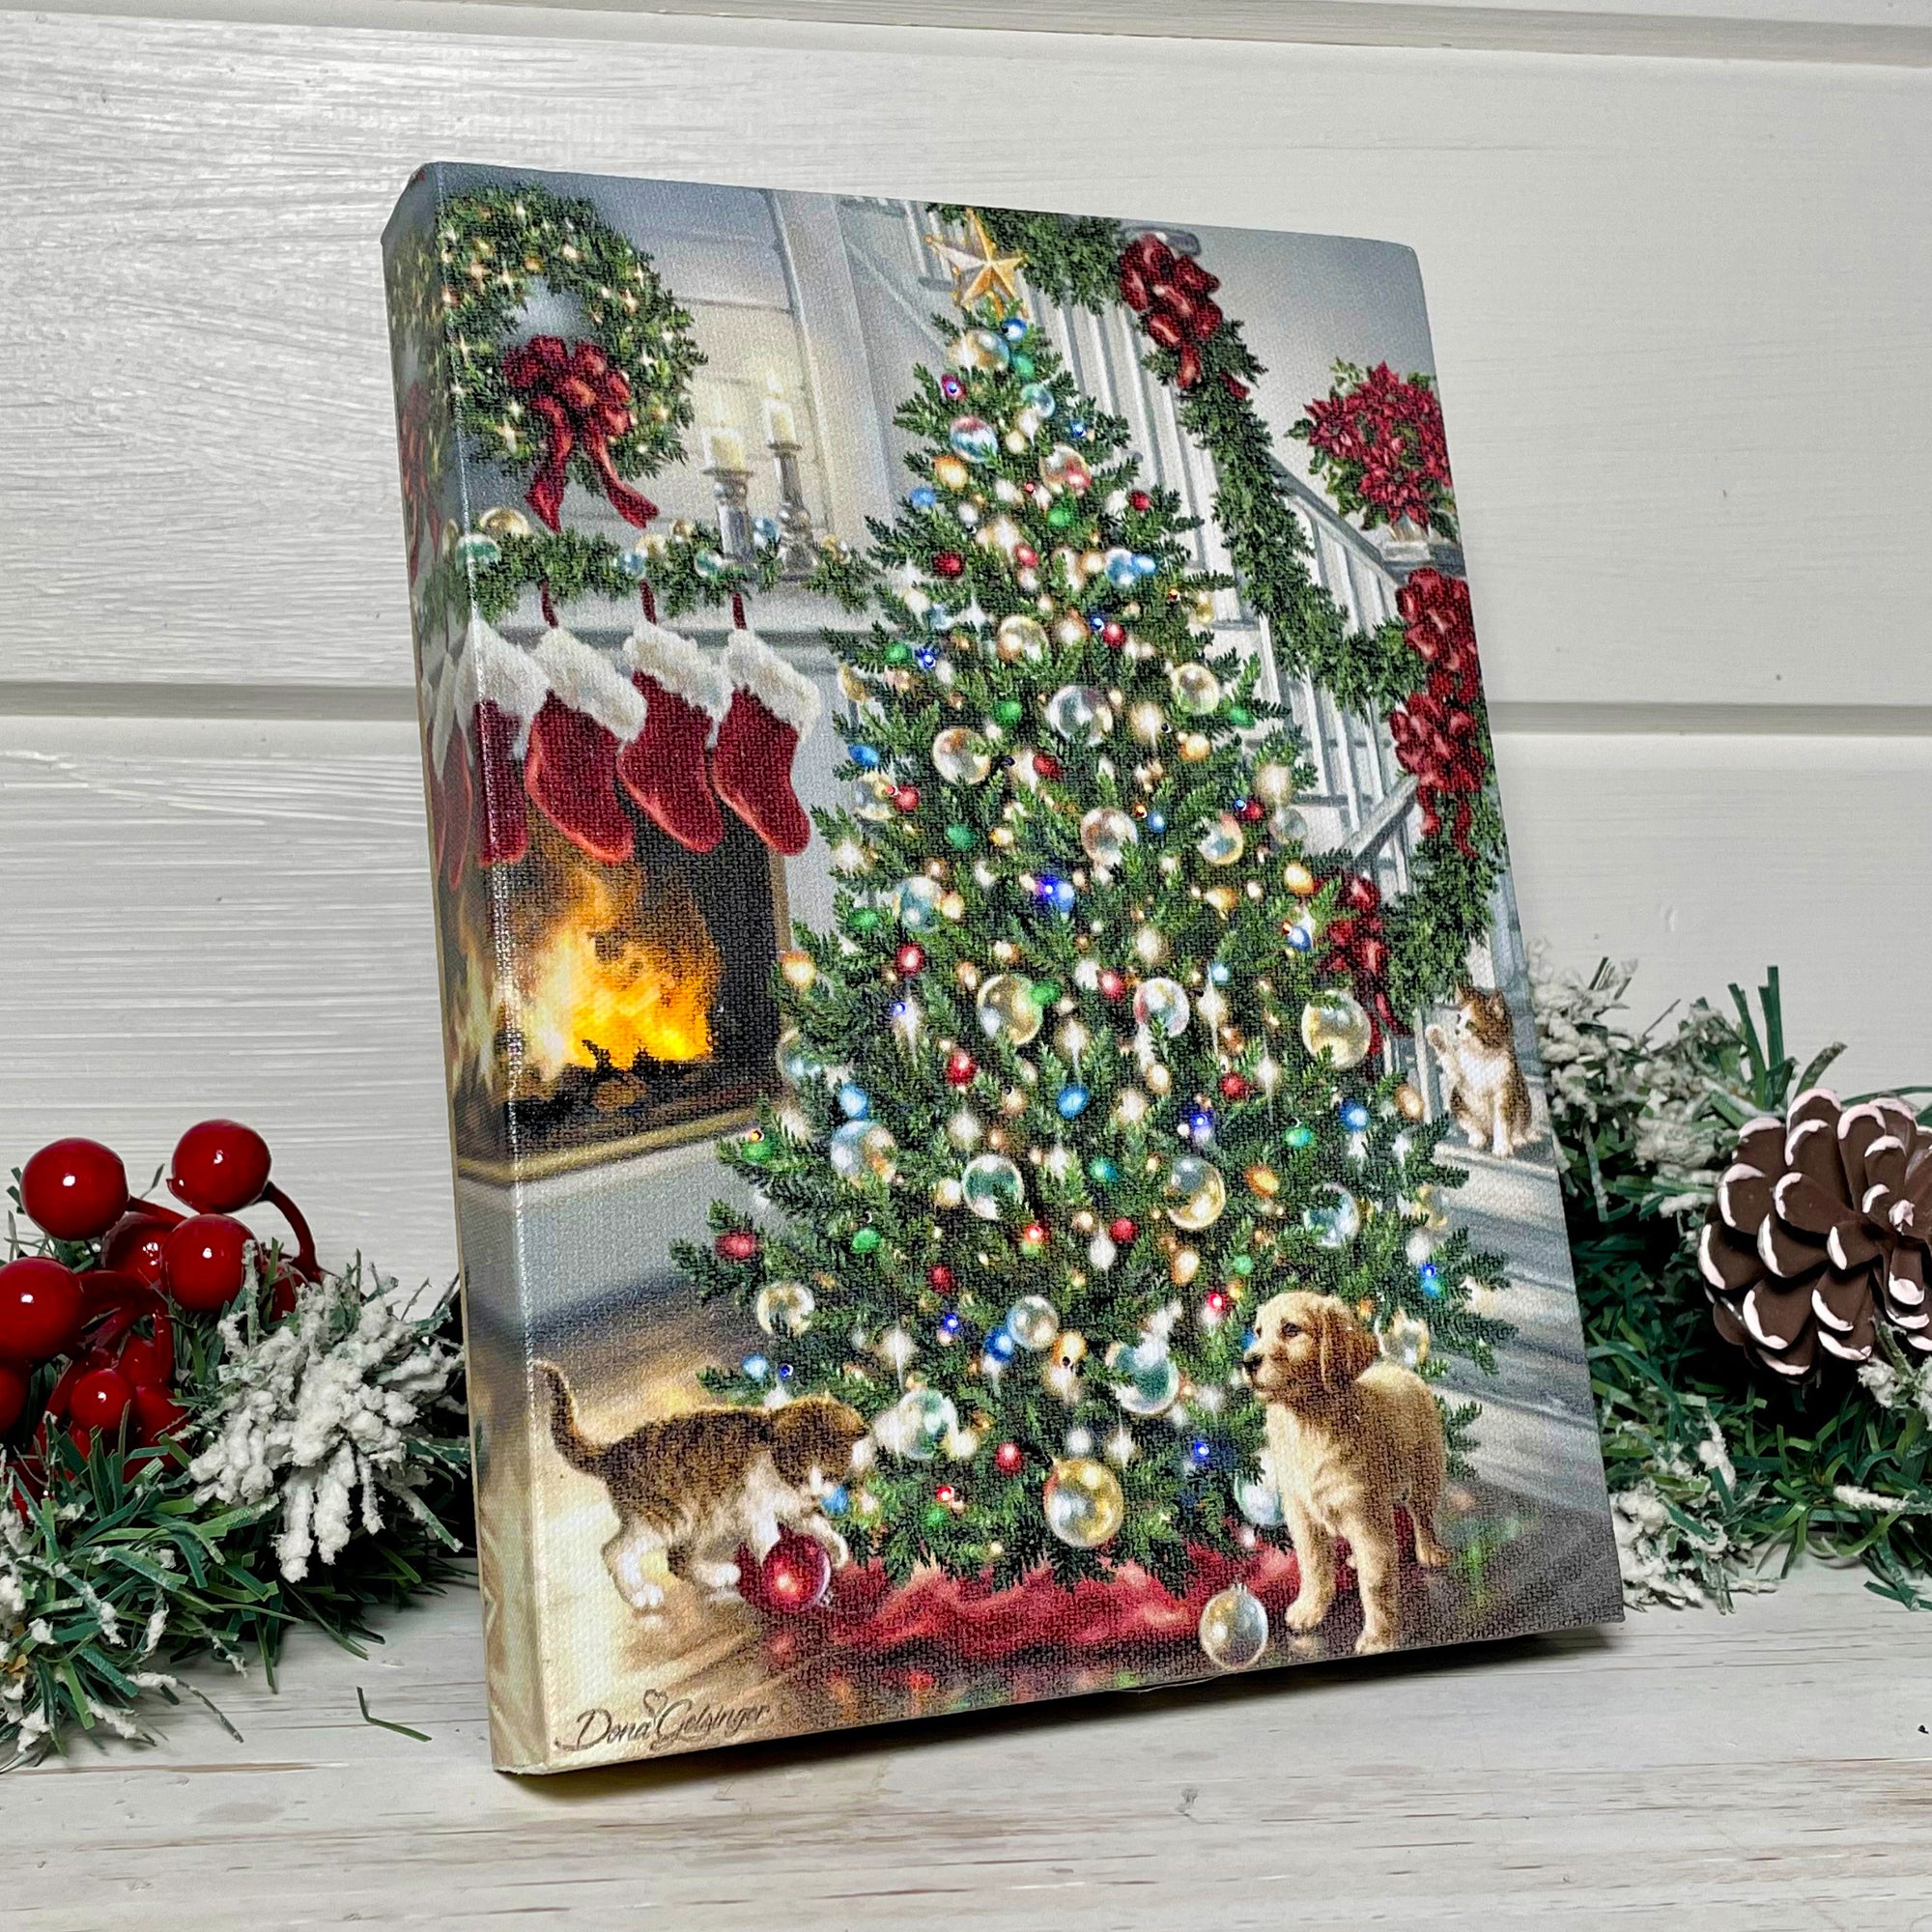 This stunning canvas features a fully decorated tree, complete with twinkling lights, sparkling ornaments, and a shining star on top. And what's a holiday scene without some furry friends? A playful puppy and adorable kittens frolic by the tree.